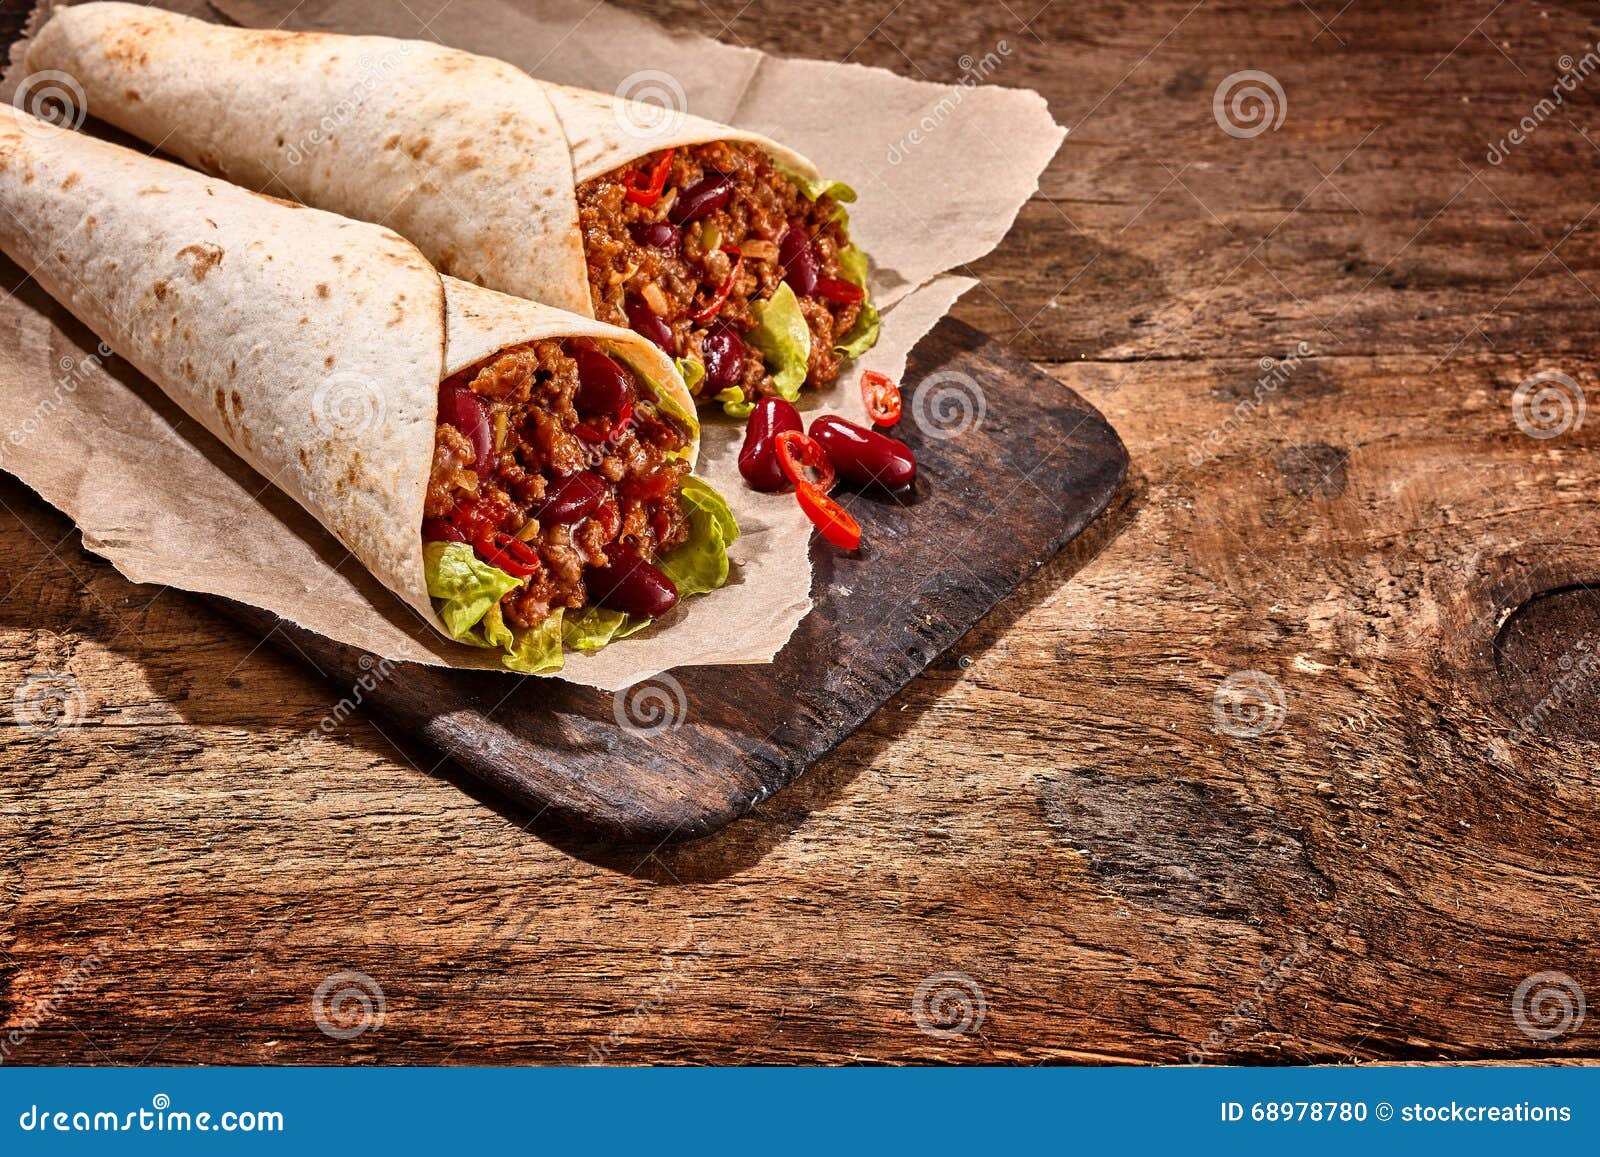 pair of chili stuffed tex mex wraps on wood table